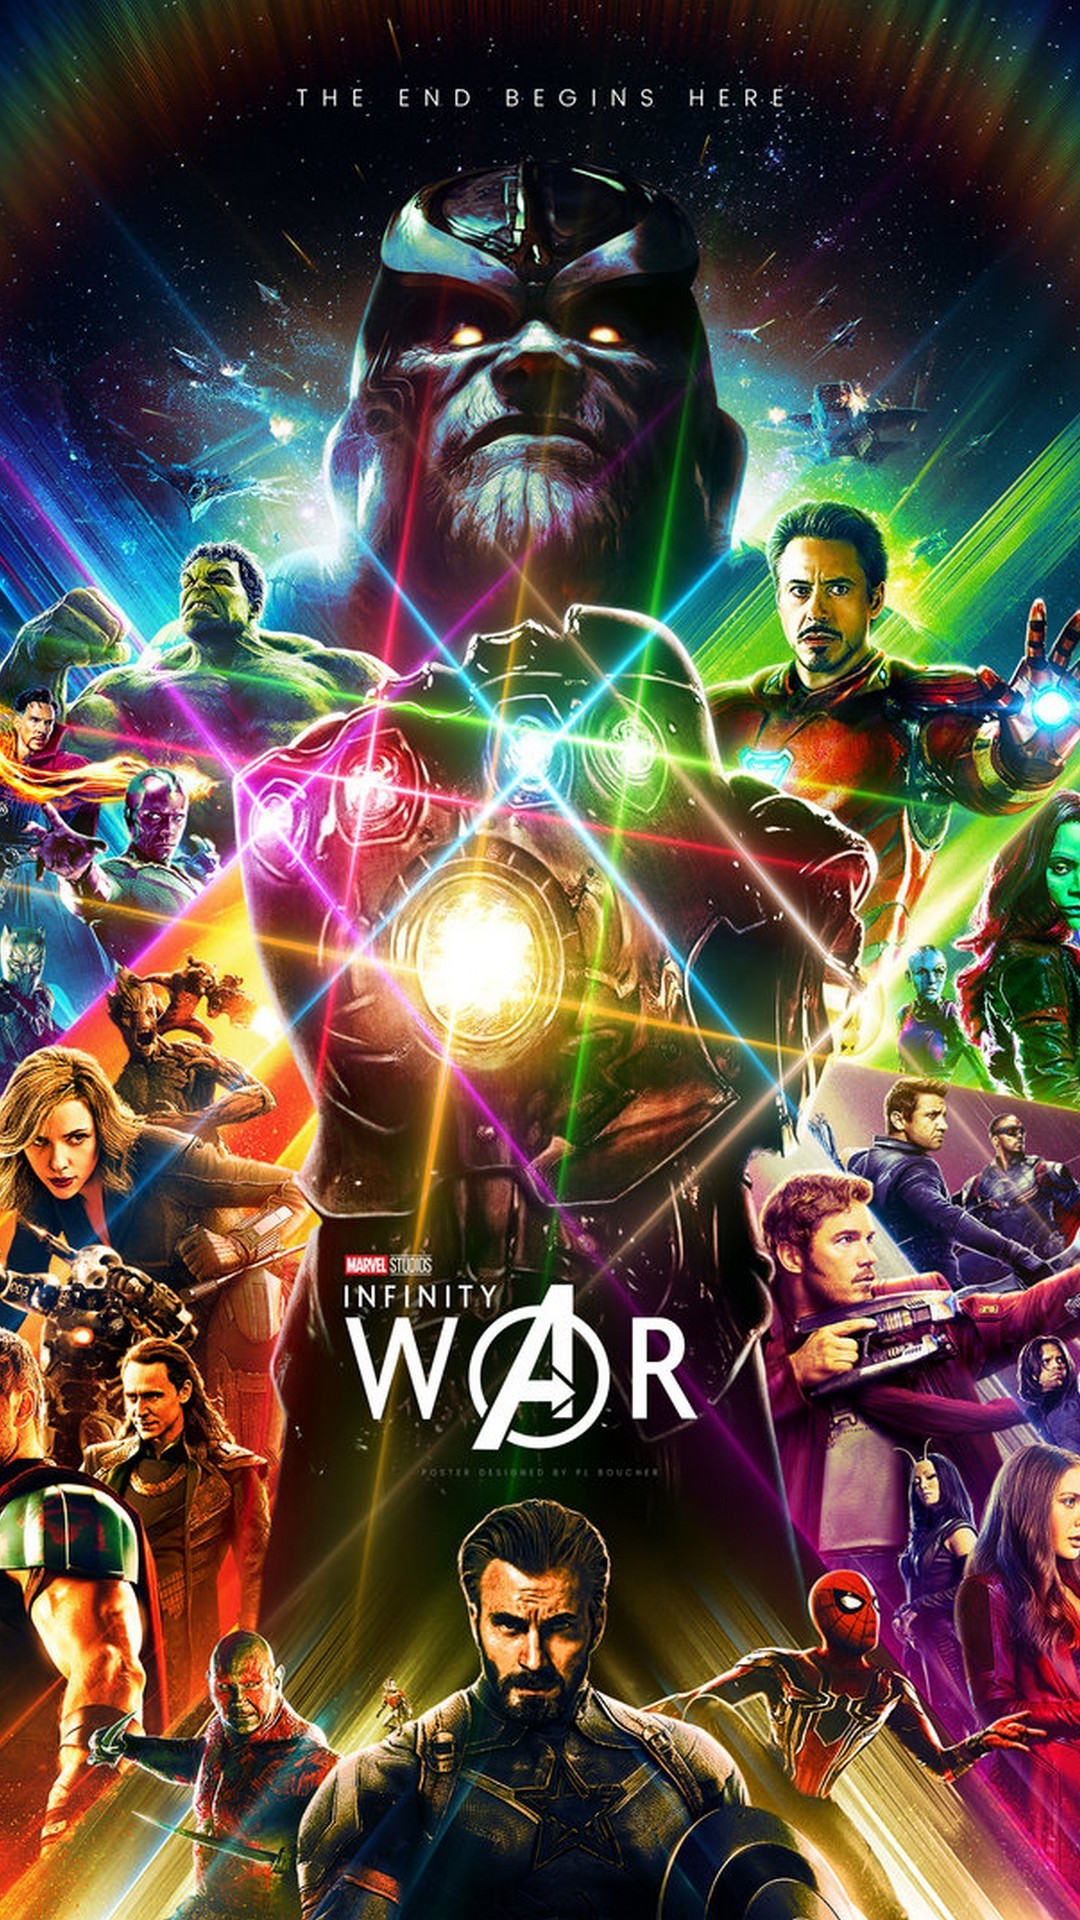 Avengers Infinity War Wallpaper Android With Hd Resolution - Cool Avengers  Infinity War - 1080x1920 Wallpaper 